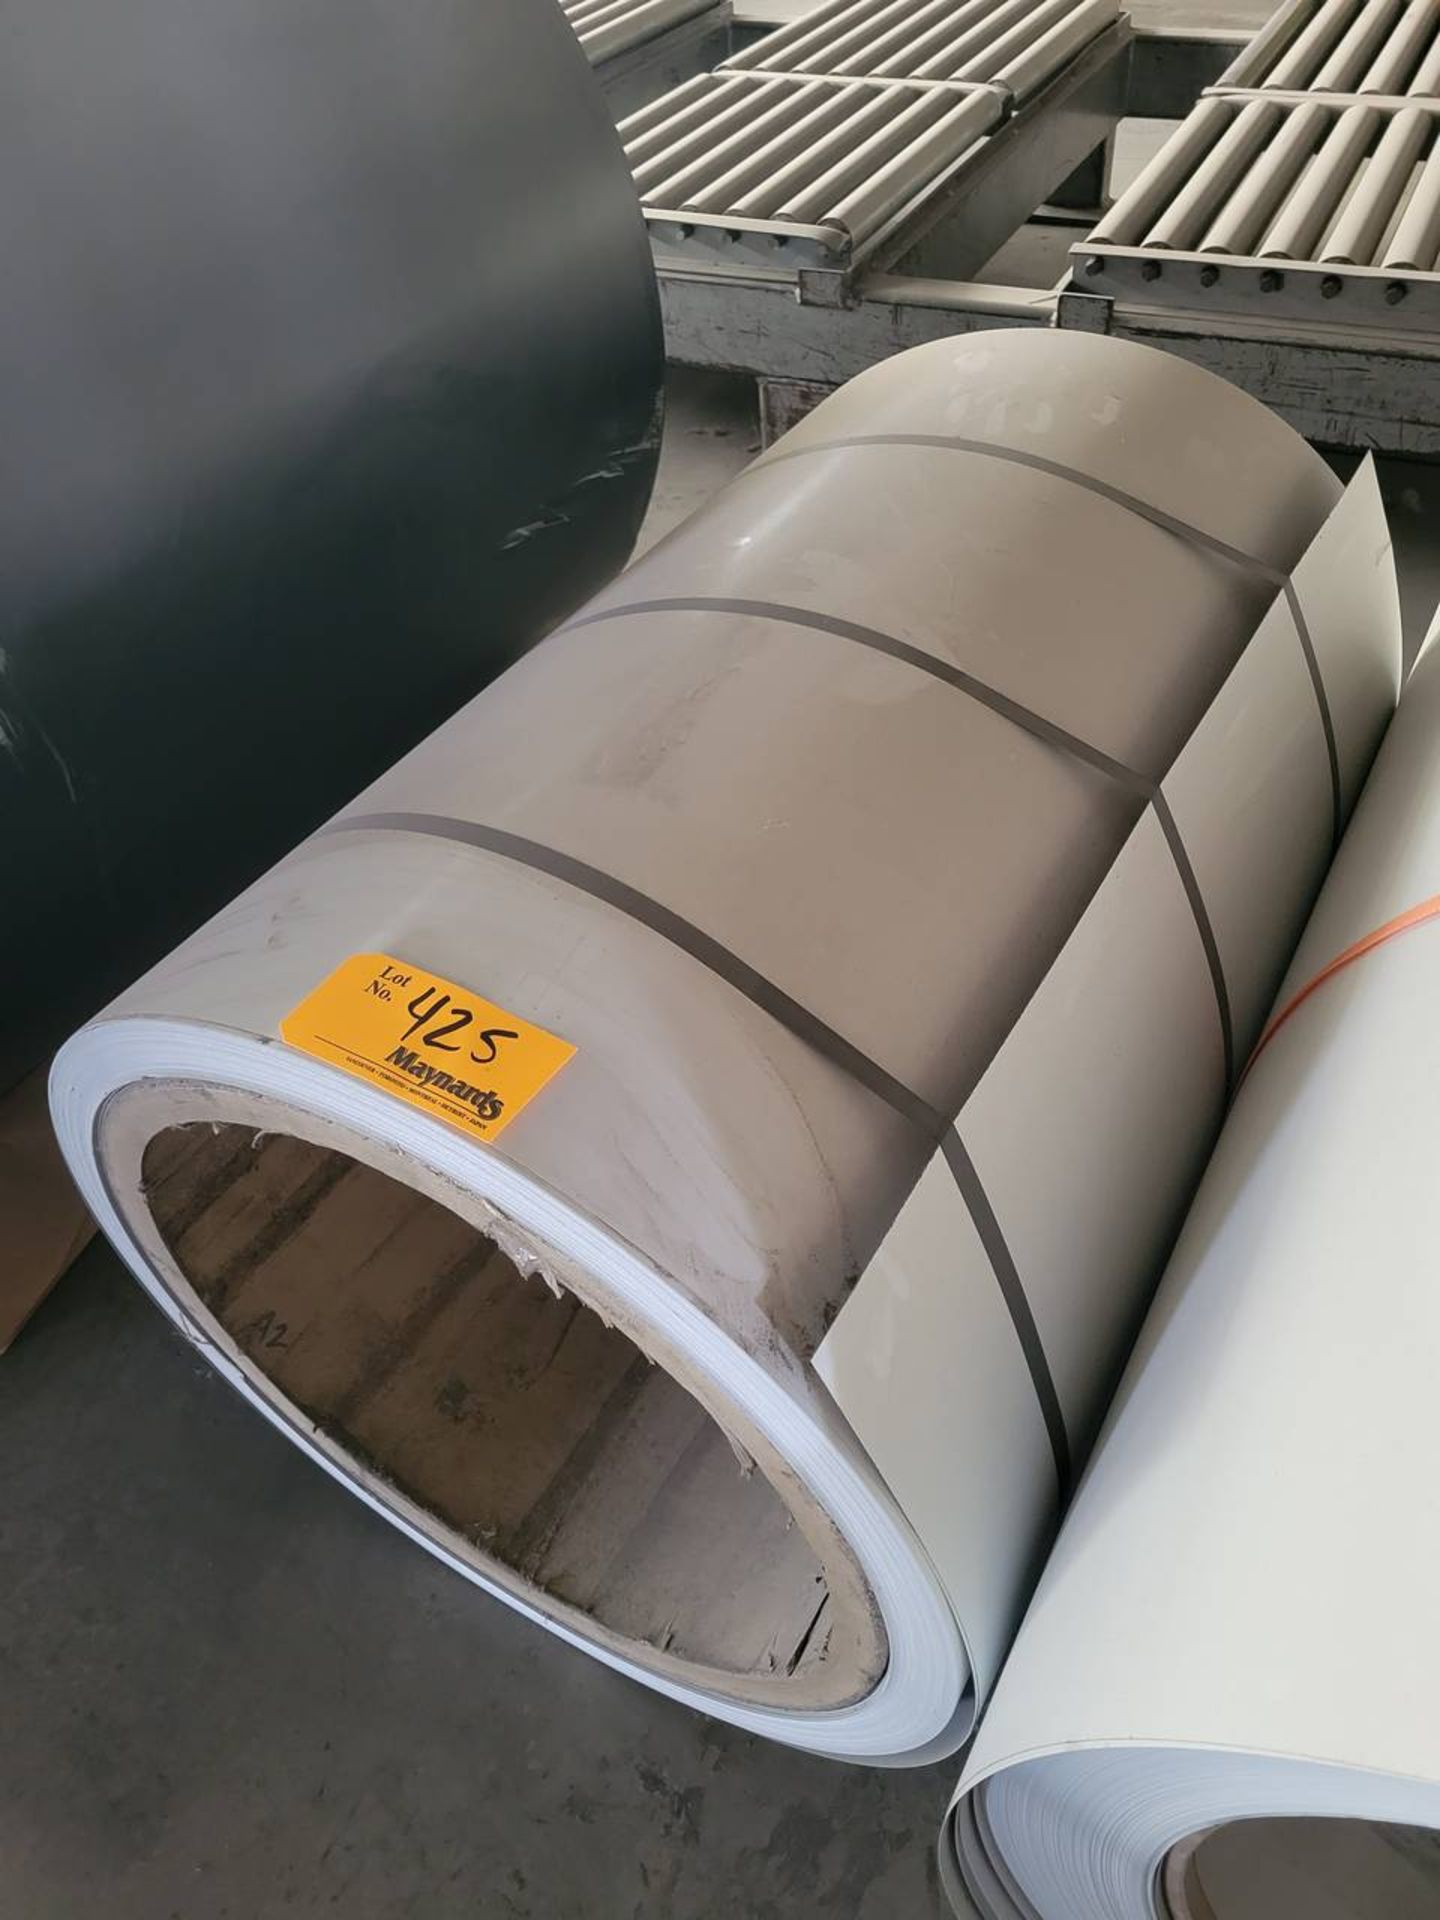 0.016 x 36" wide coil of coated sheet metal